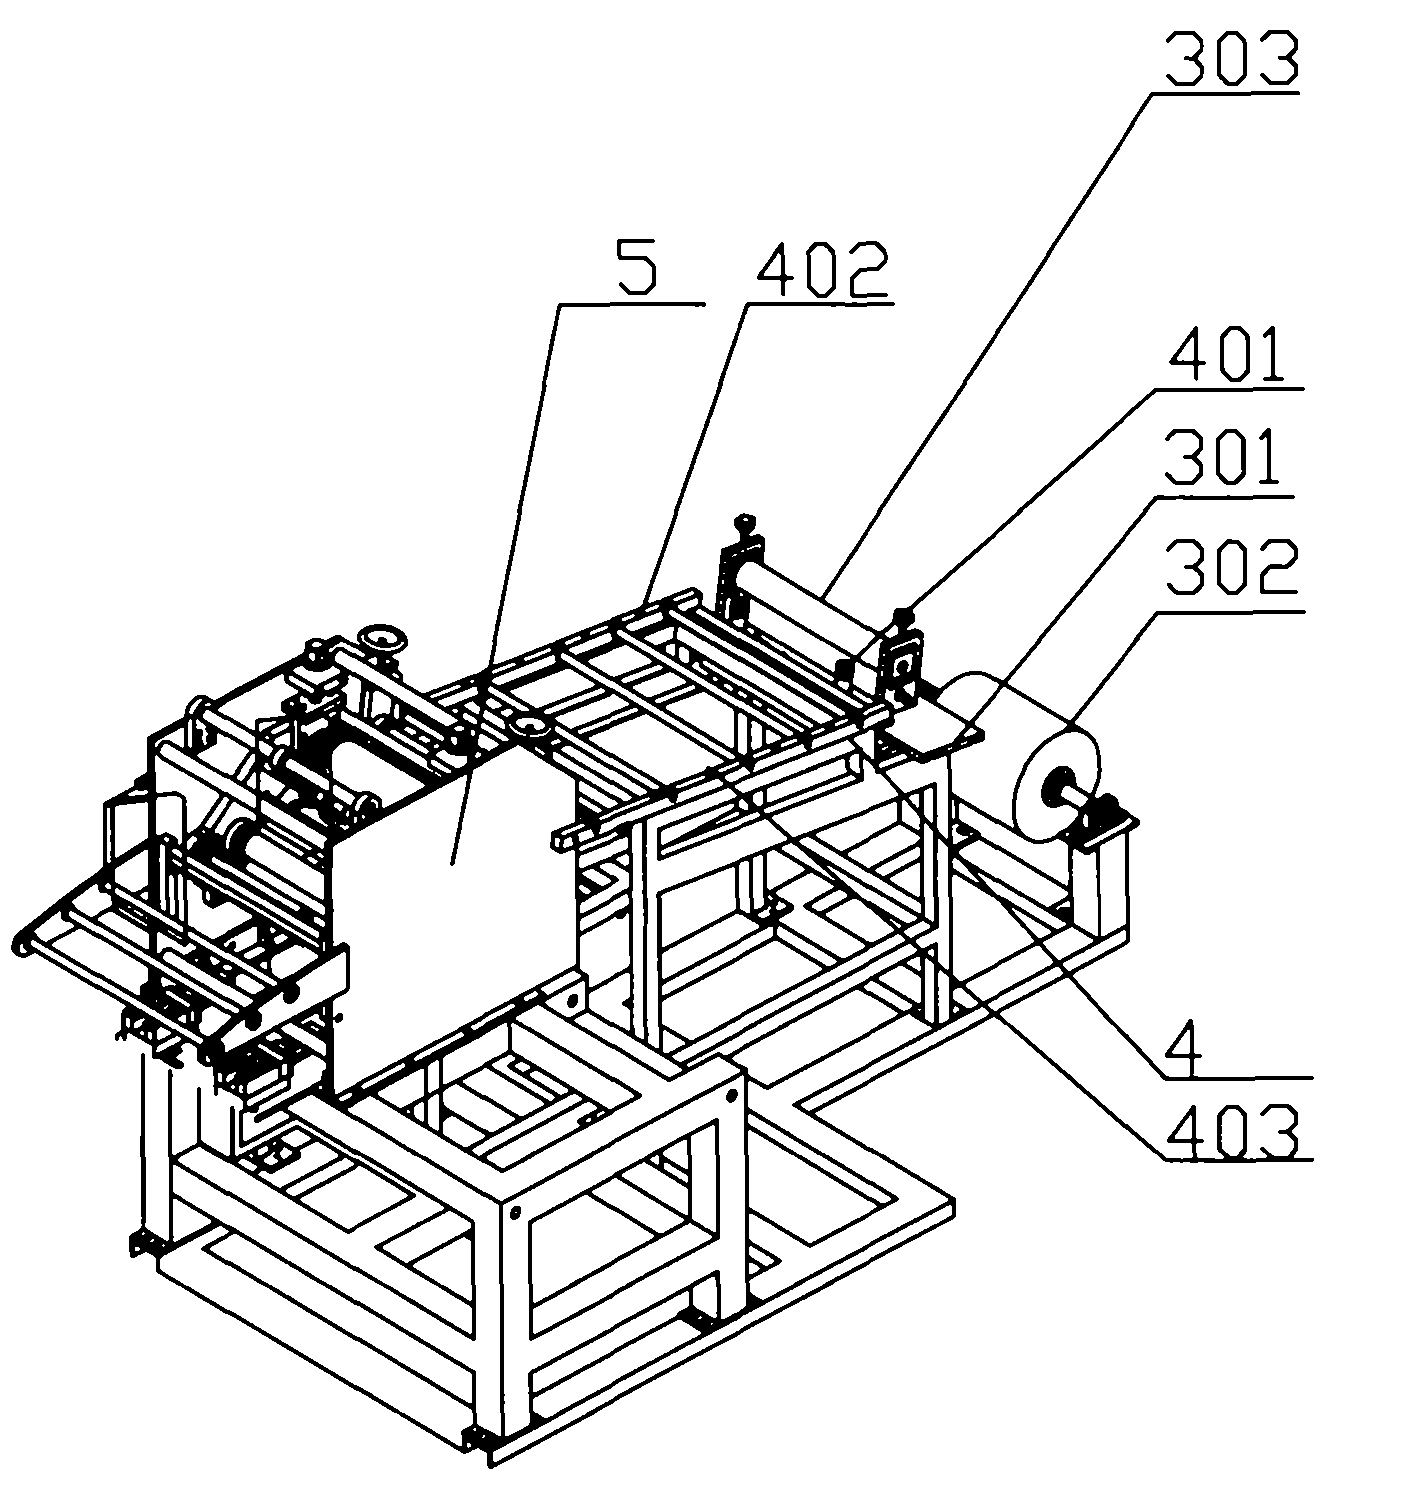 Automatic production line for shells of electrical appliances